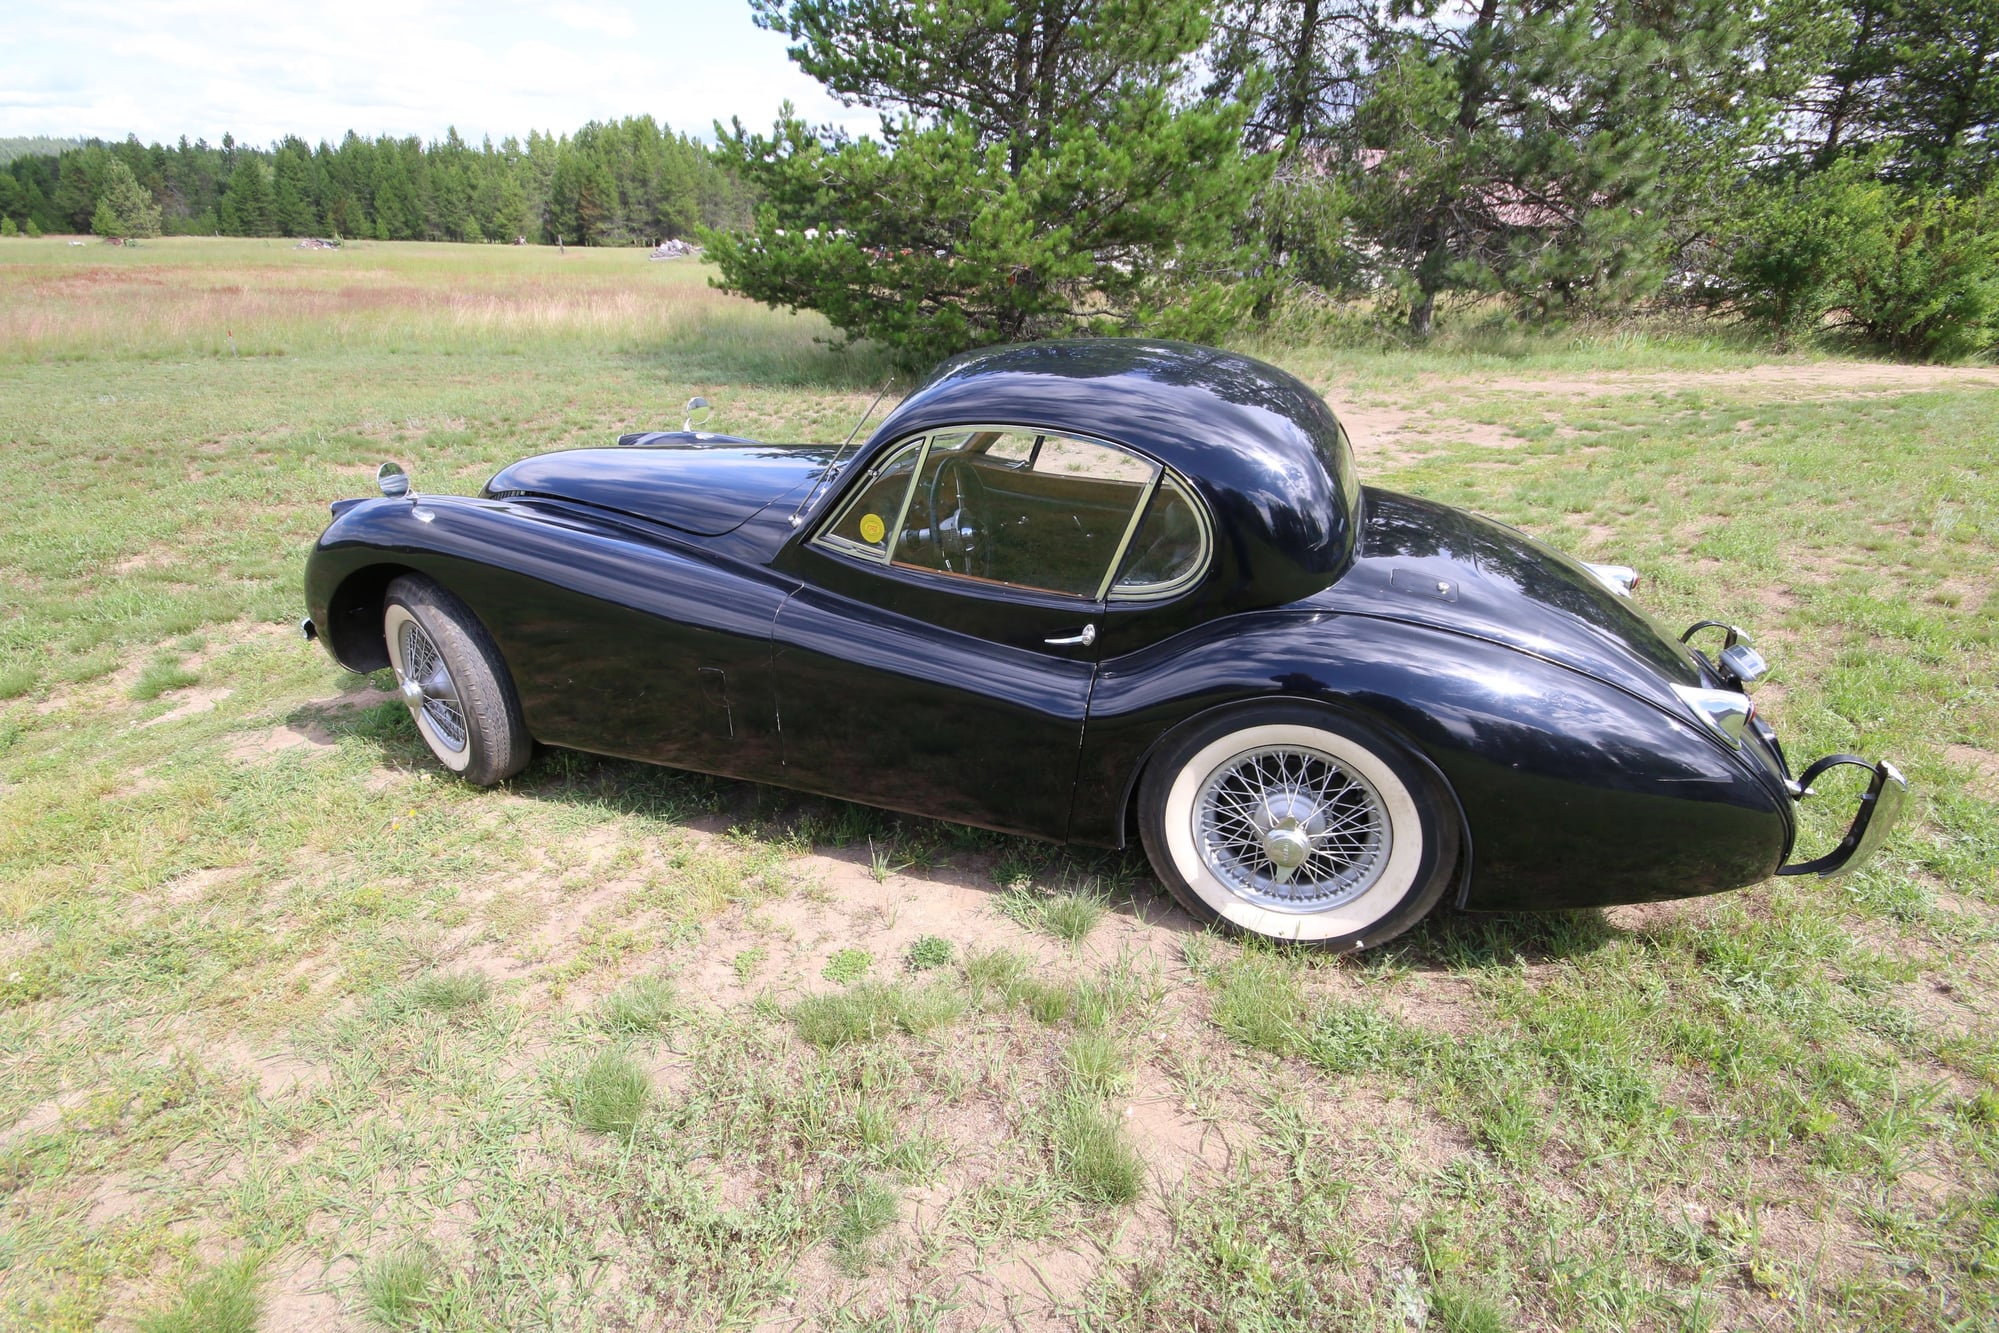 1952 Jaguar XK120 - All original numbers matching car with heratige certificate and clear title. - Used - VIN XK120 679526 - 7,433 Miles - 6 cyl - 2WD - Manual - Coupe - Black - Newport, WA 99156, United States